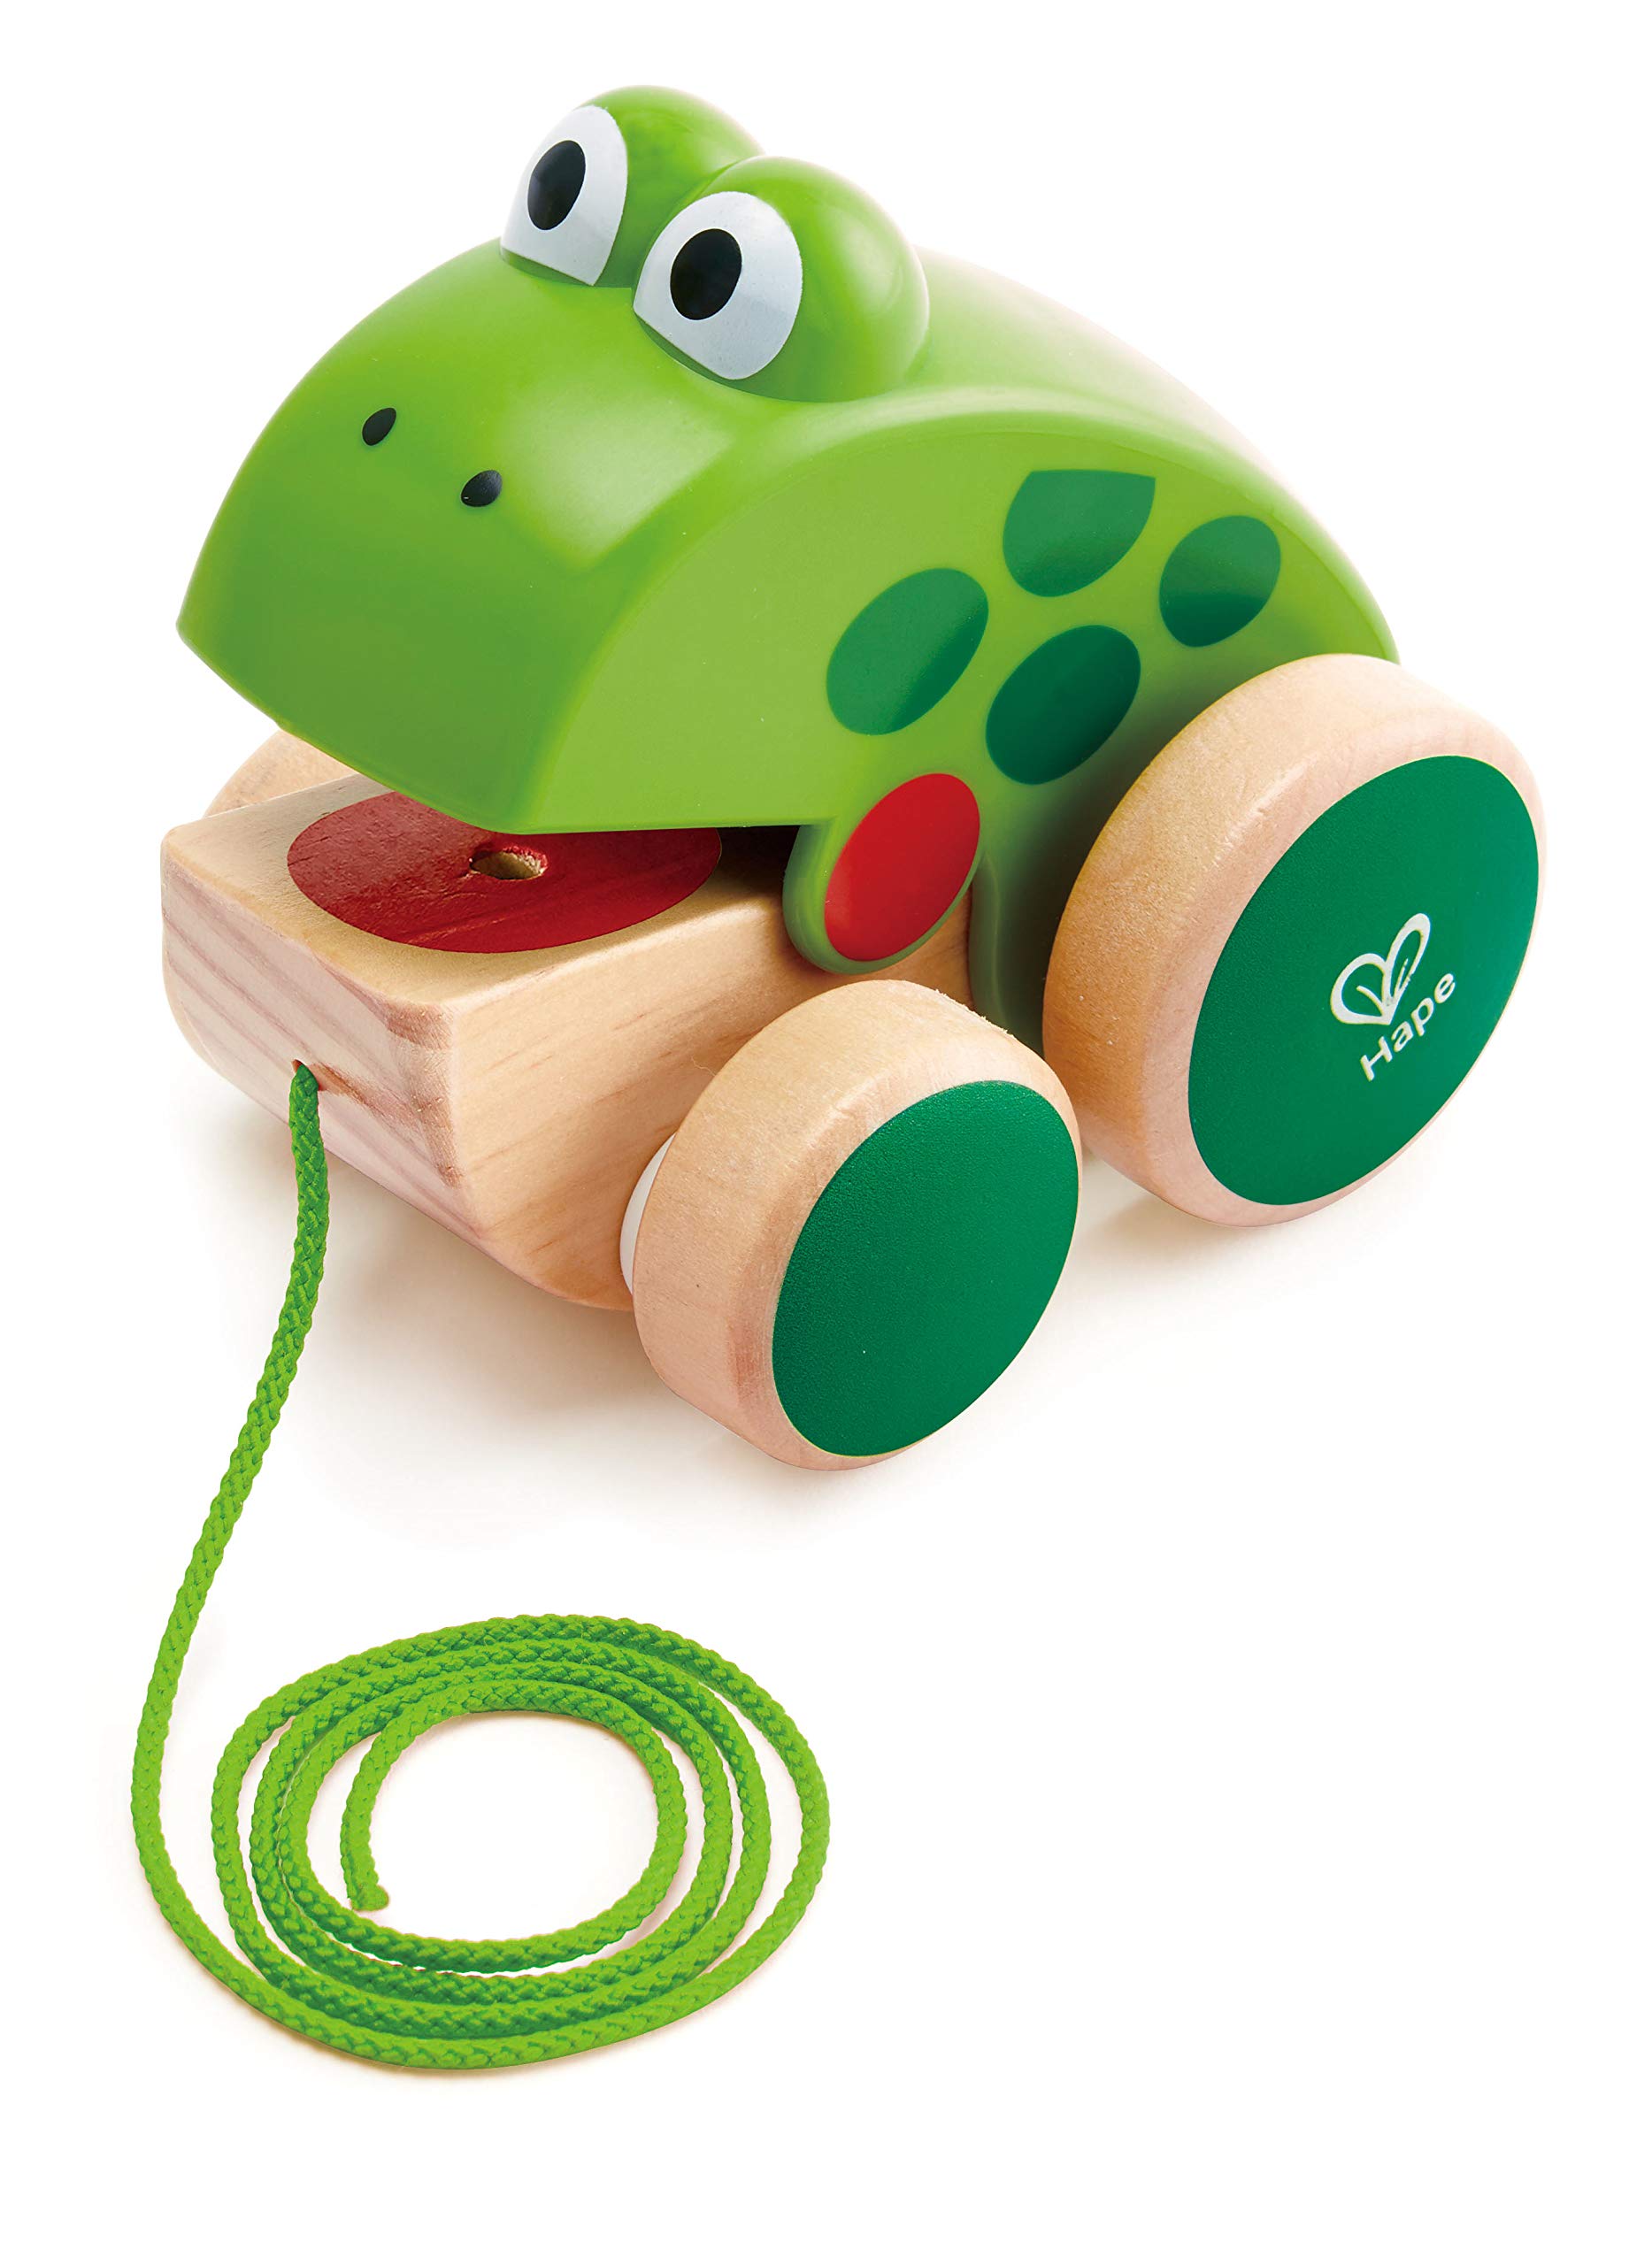 Hape Frog Pull-Along | Wooden Frog Fly Eating Pull Toddler Toy, 4.6 x 3.3 x 3.8 inches, Green